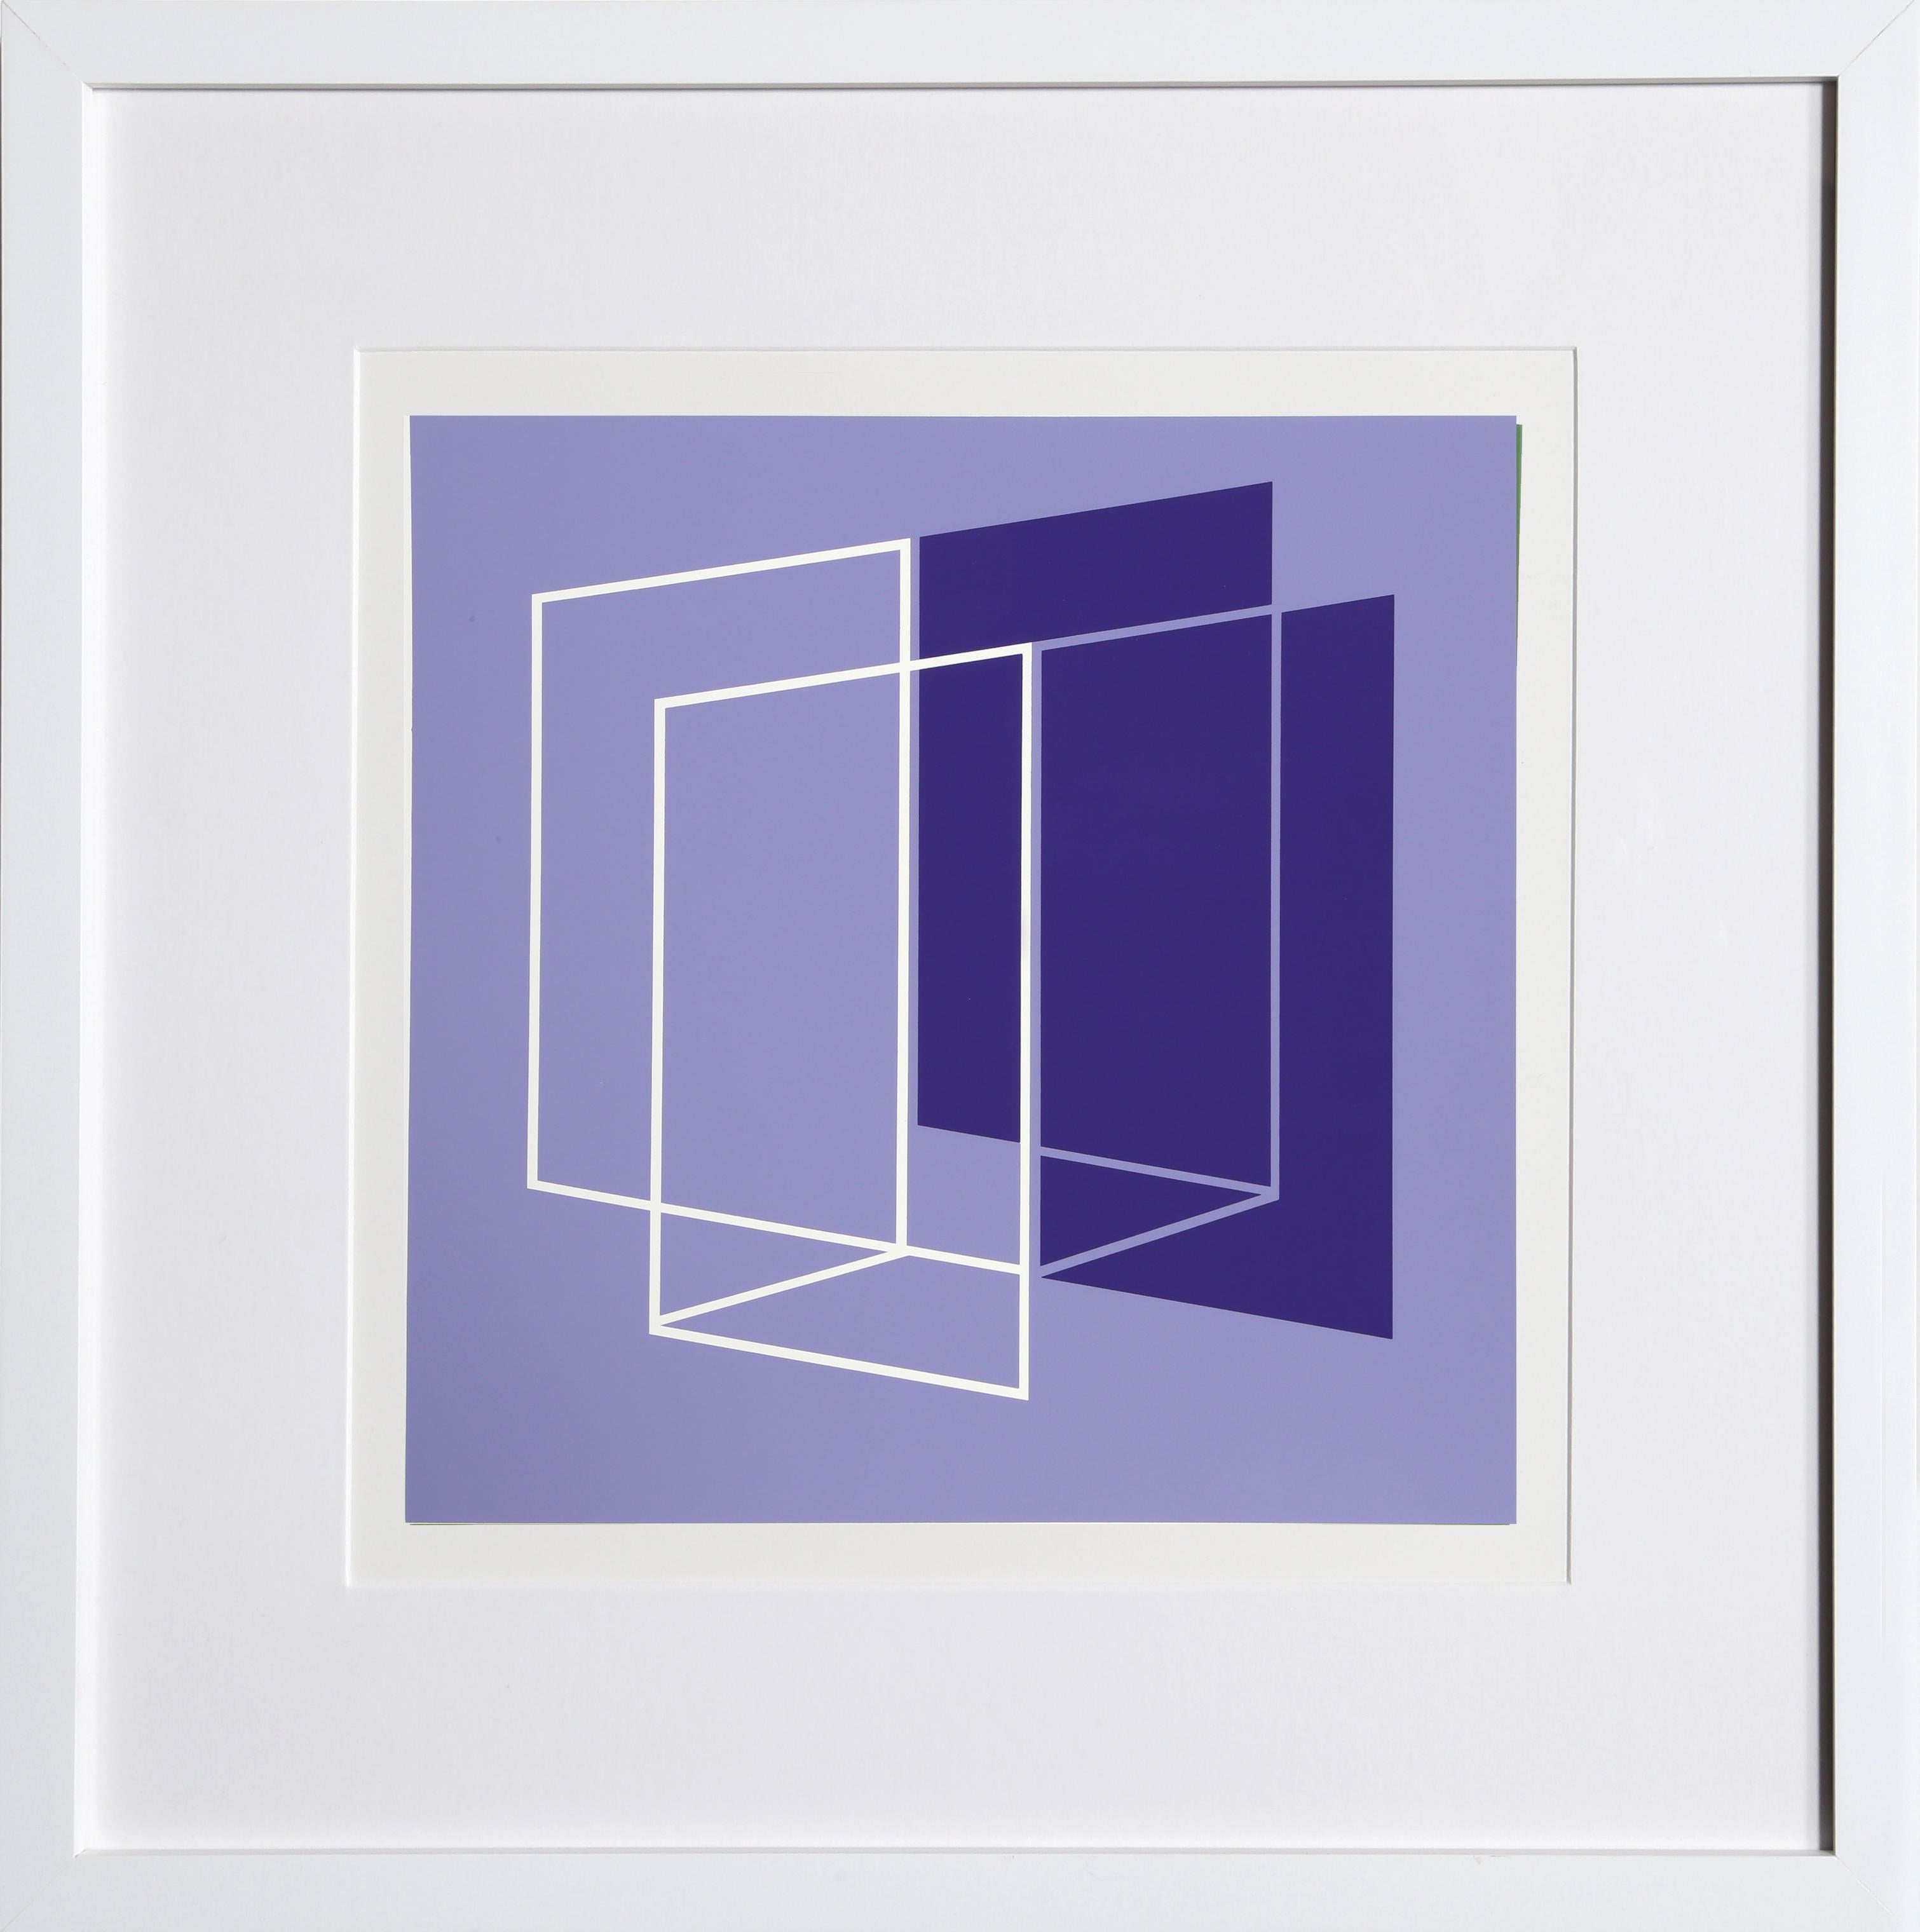 From the portfolio “Formulation: Articulation” created by Josef Albers in 1972. This monumental series consists of 127 original silkscreens that are a definitive survey of the artists most important color and shape theories.  A copy of the colophon